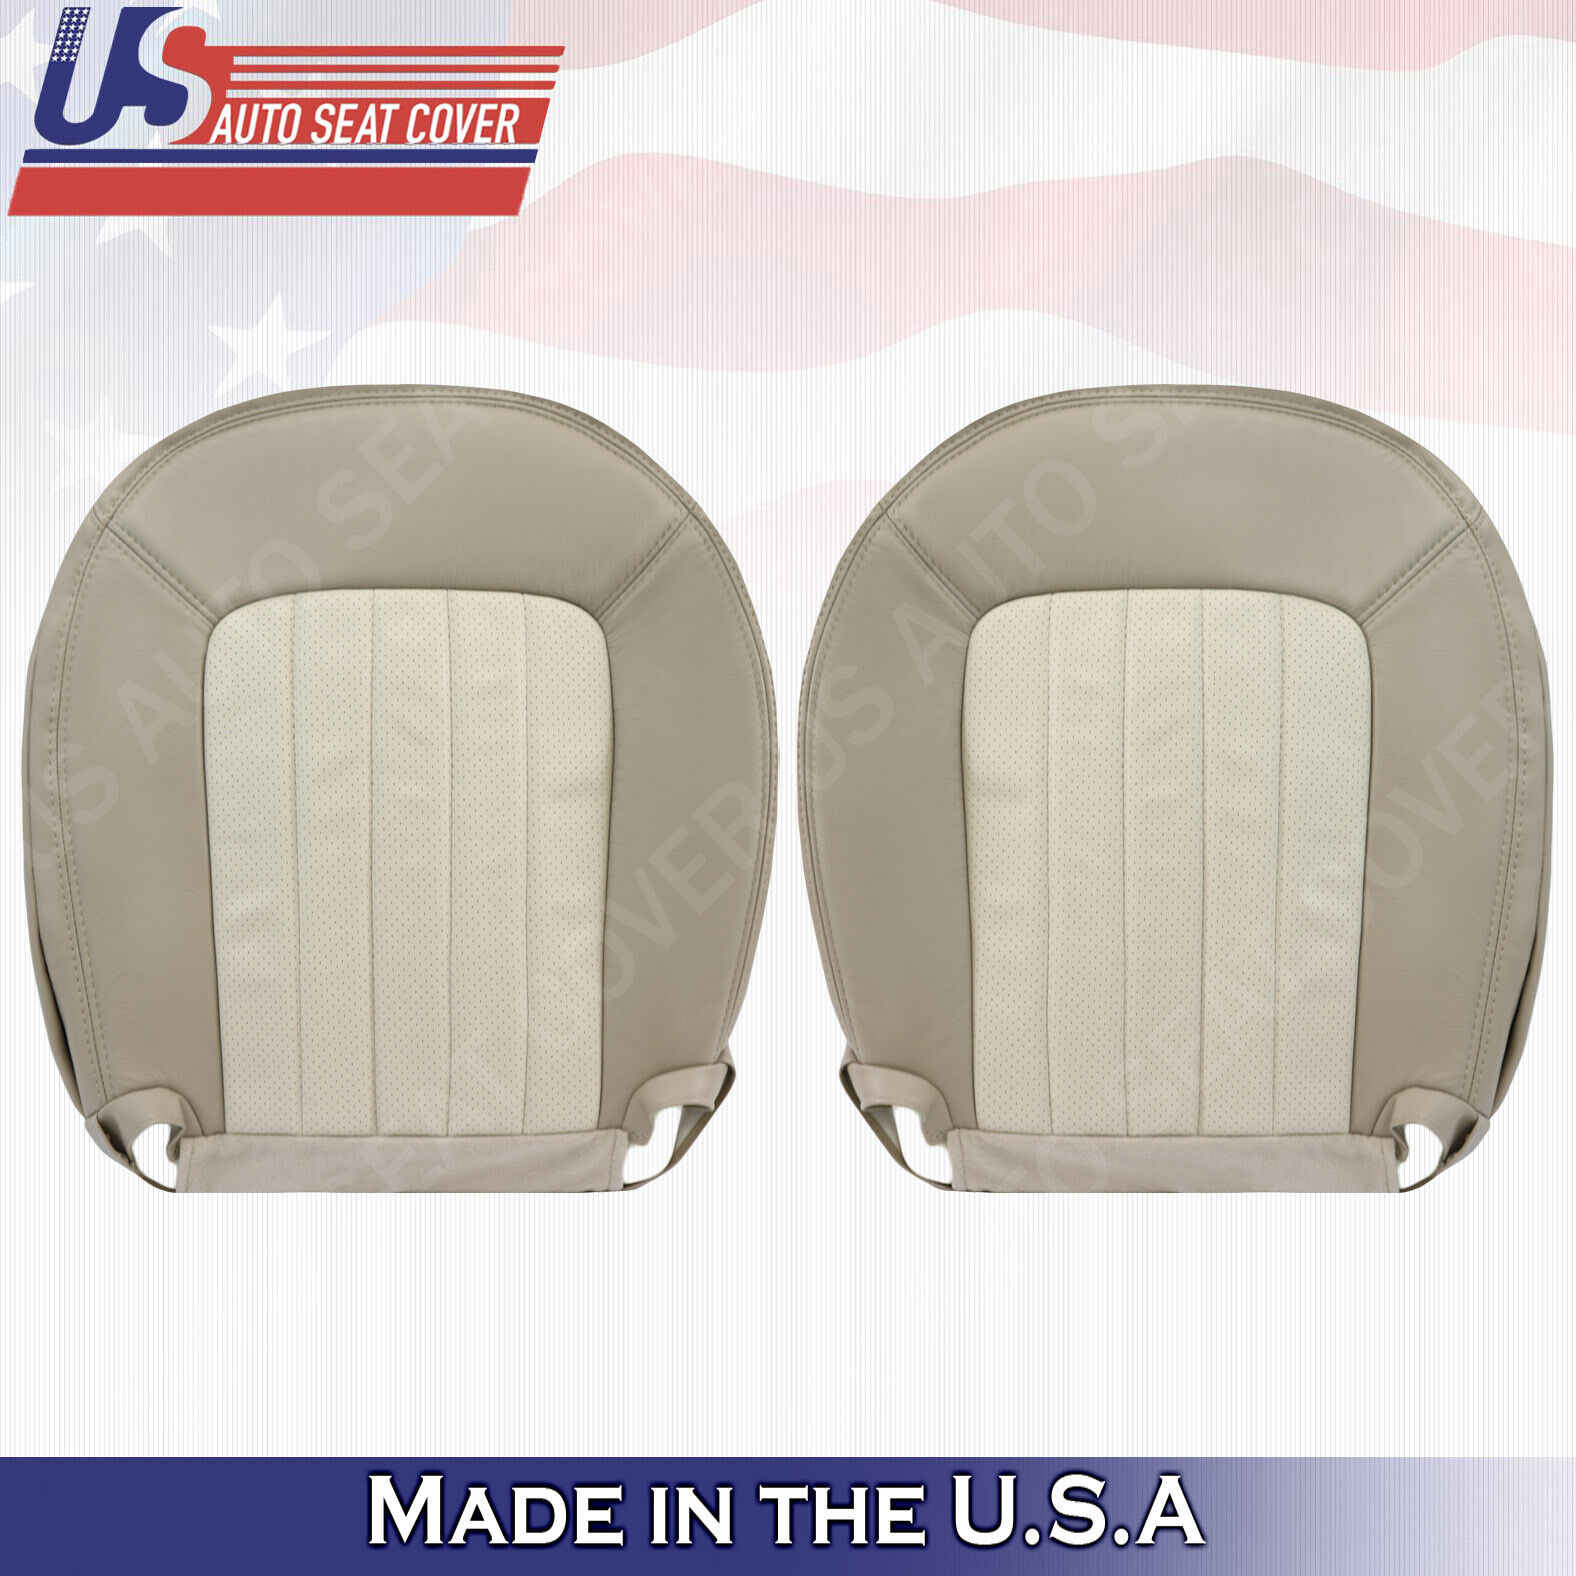 2002 TO 2005 Mercury Mountaineer FRONT BOTTOMS Perf Leather Cover 2tone Tan